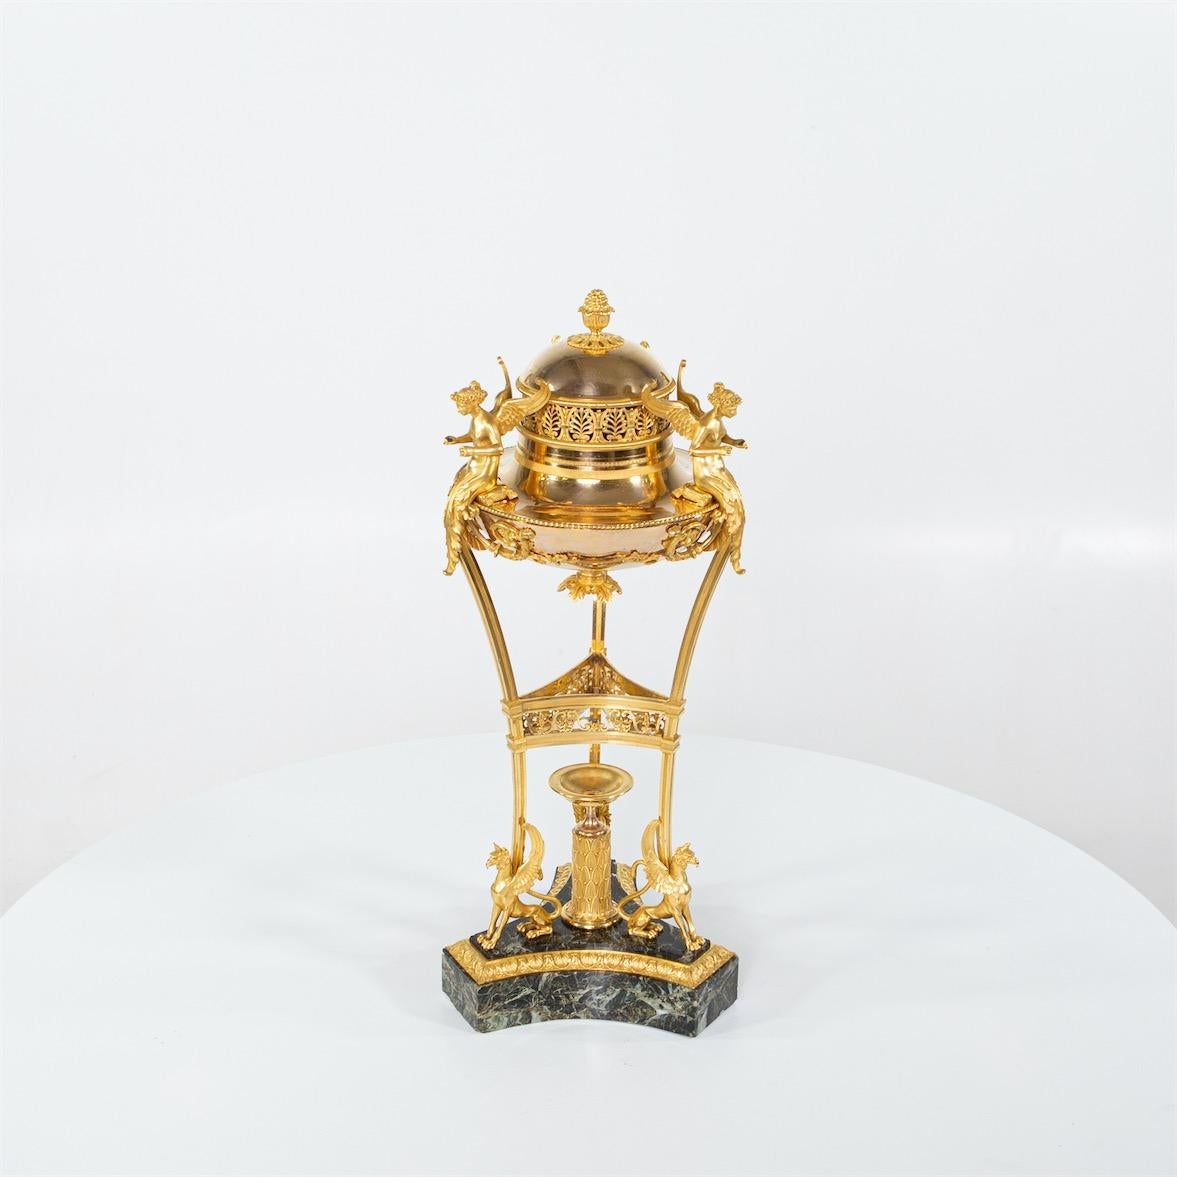 The masterfully crafted brûle perfume stands on a green marble trefoil base. On this pedestal, a round 